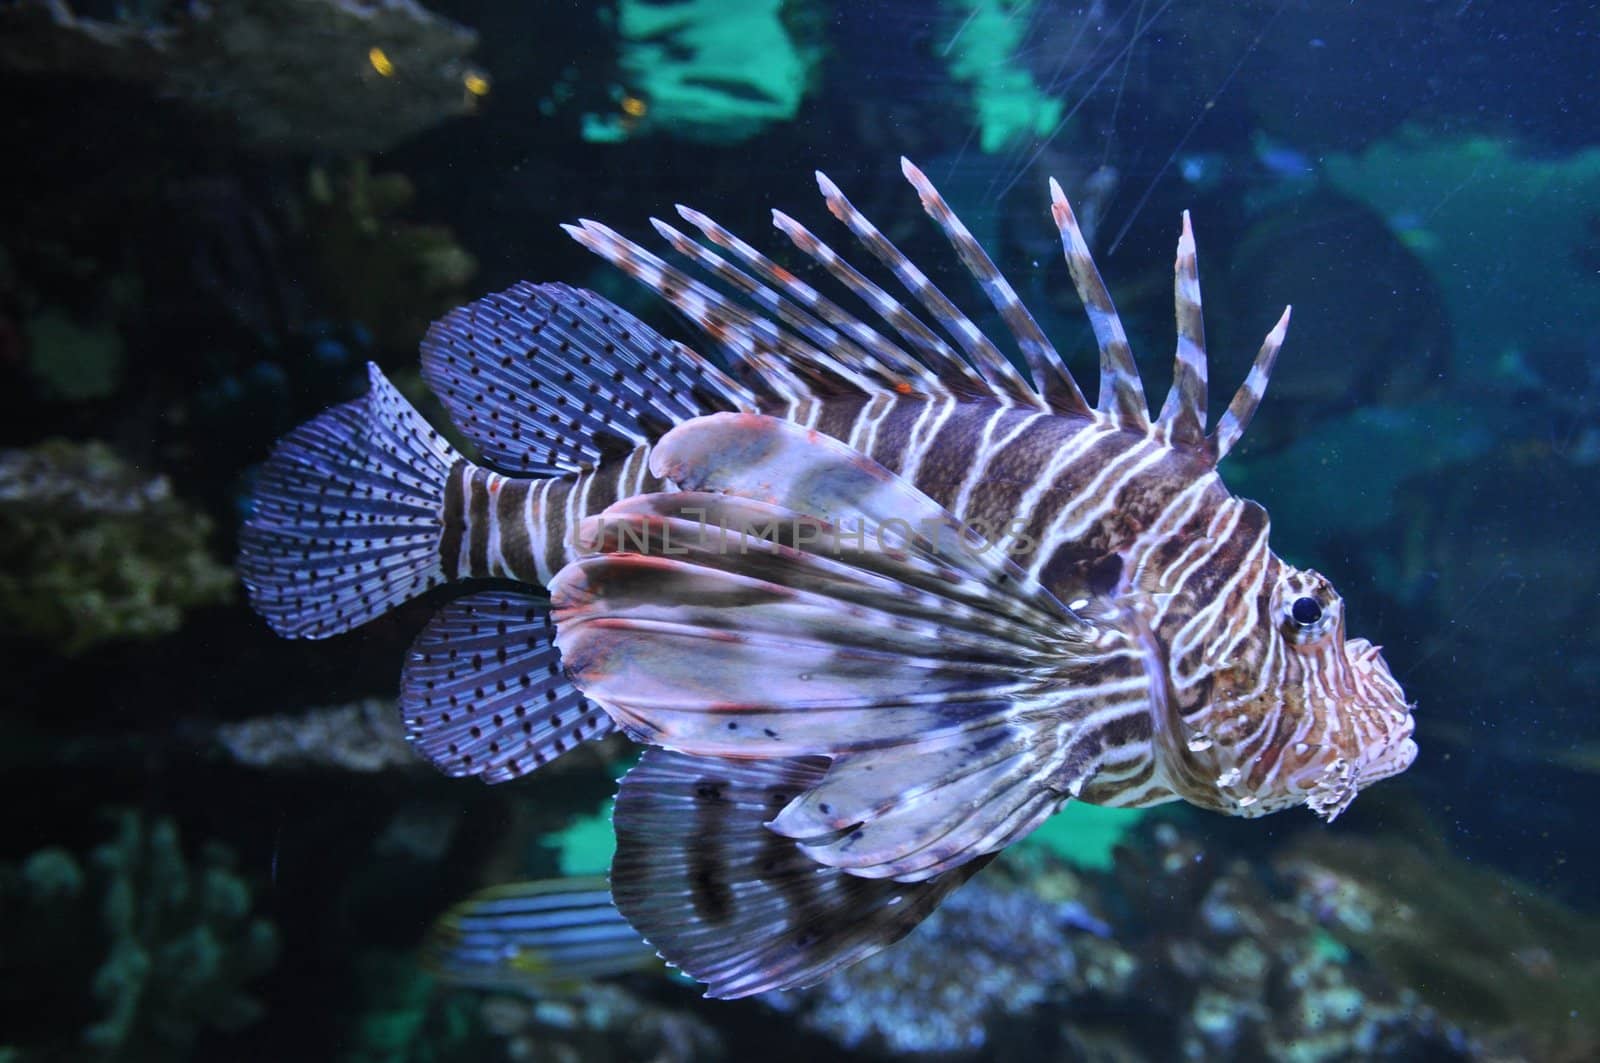 Lion fish in the water